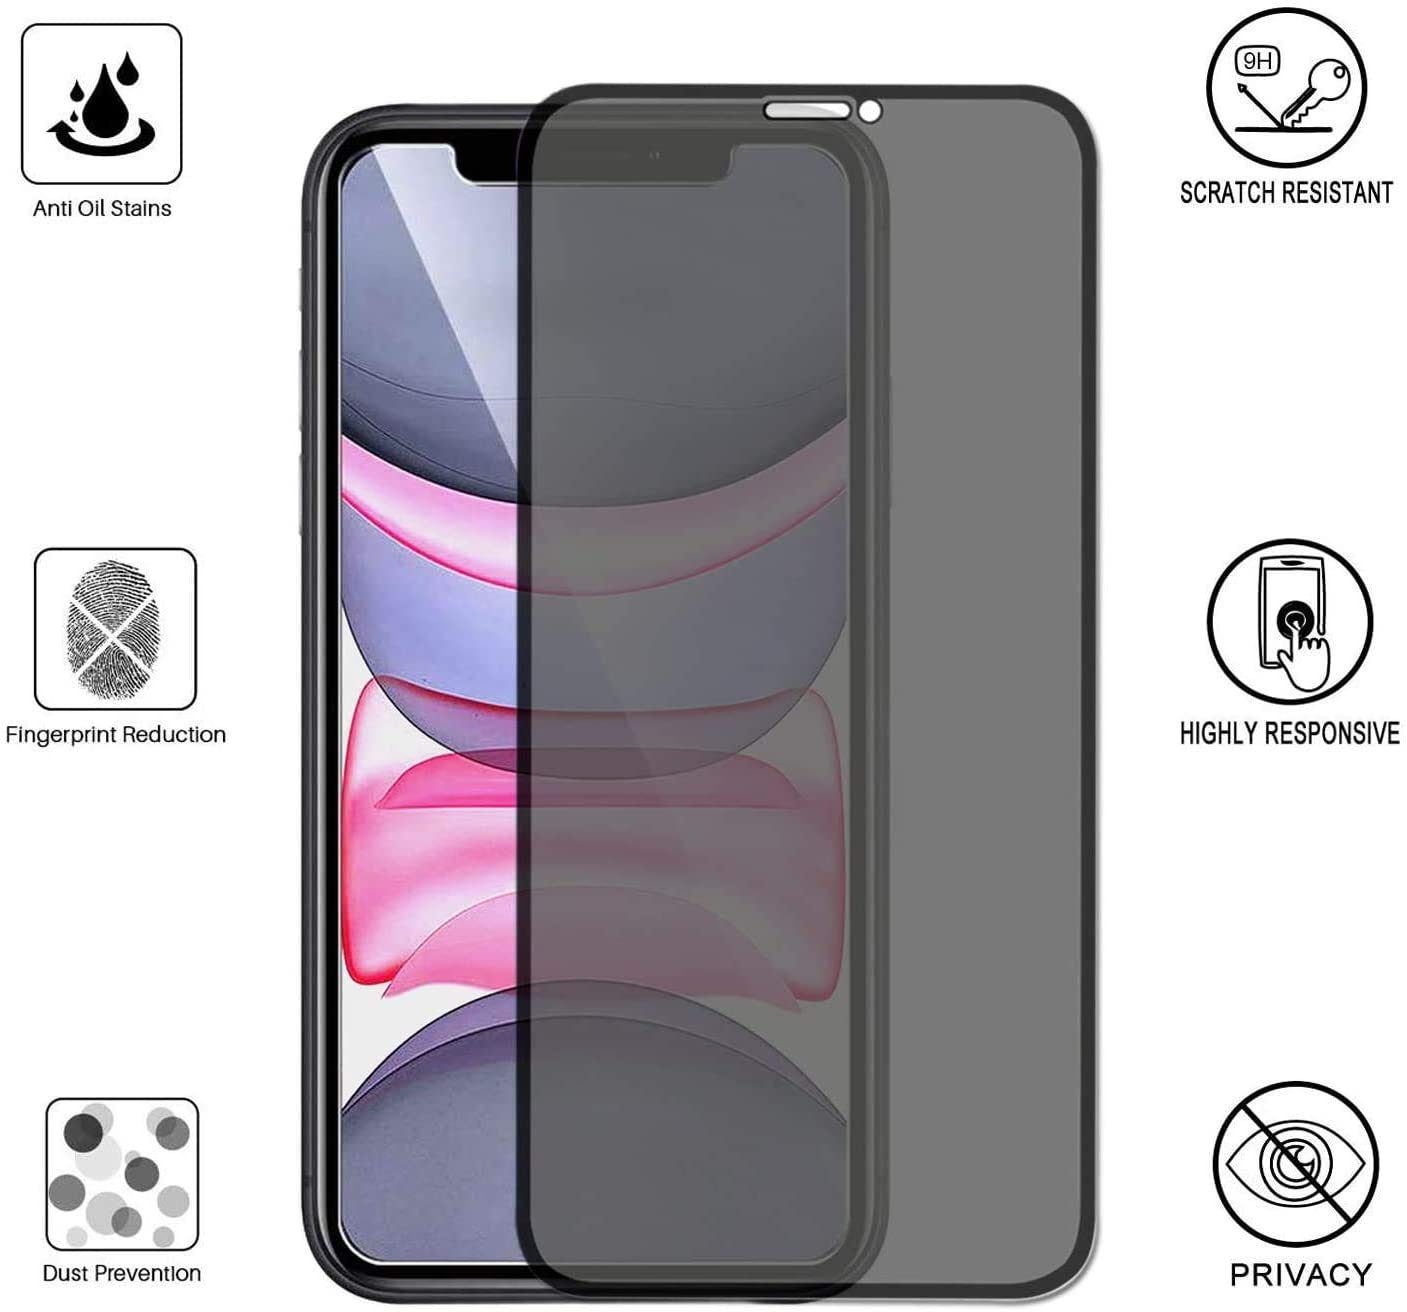 RhinoGuards 21D Privacy Screen Protector + Back Protector FREE (Buy 1 Get 1 Free)